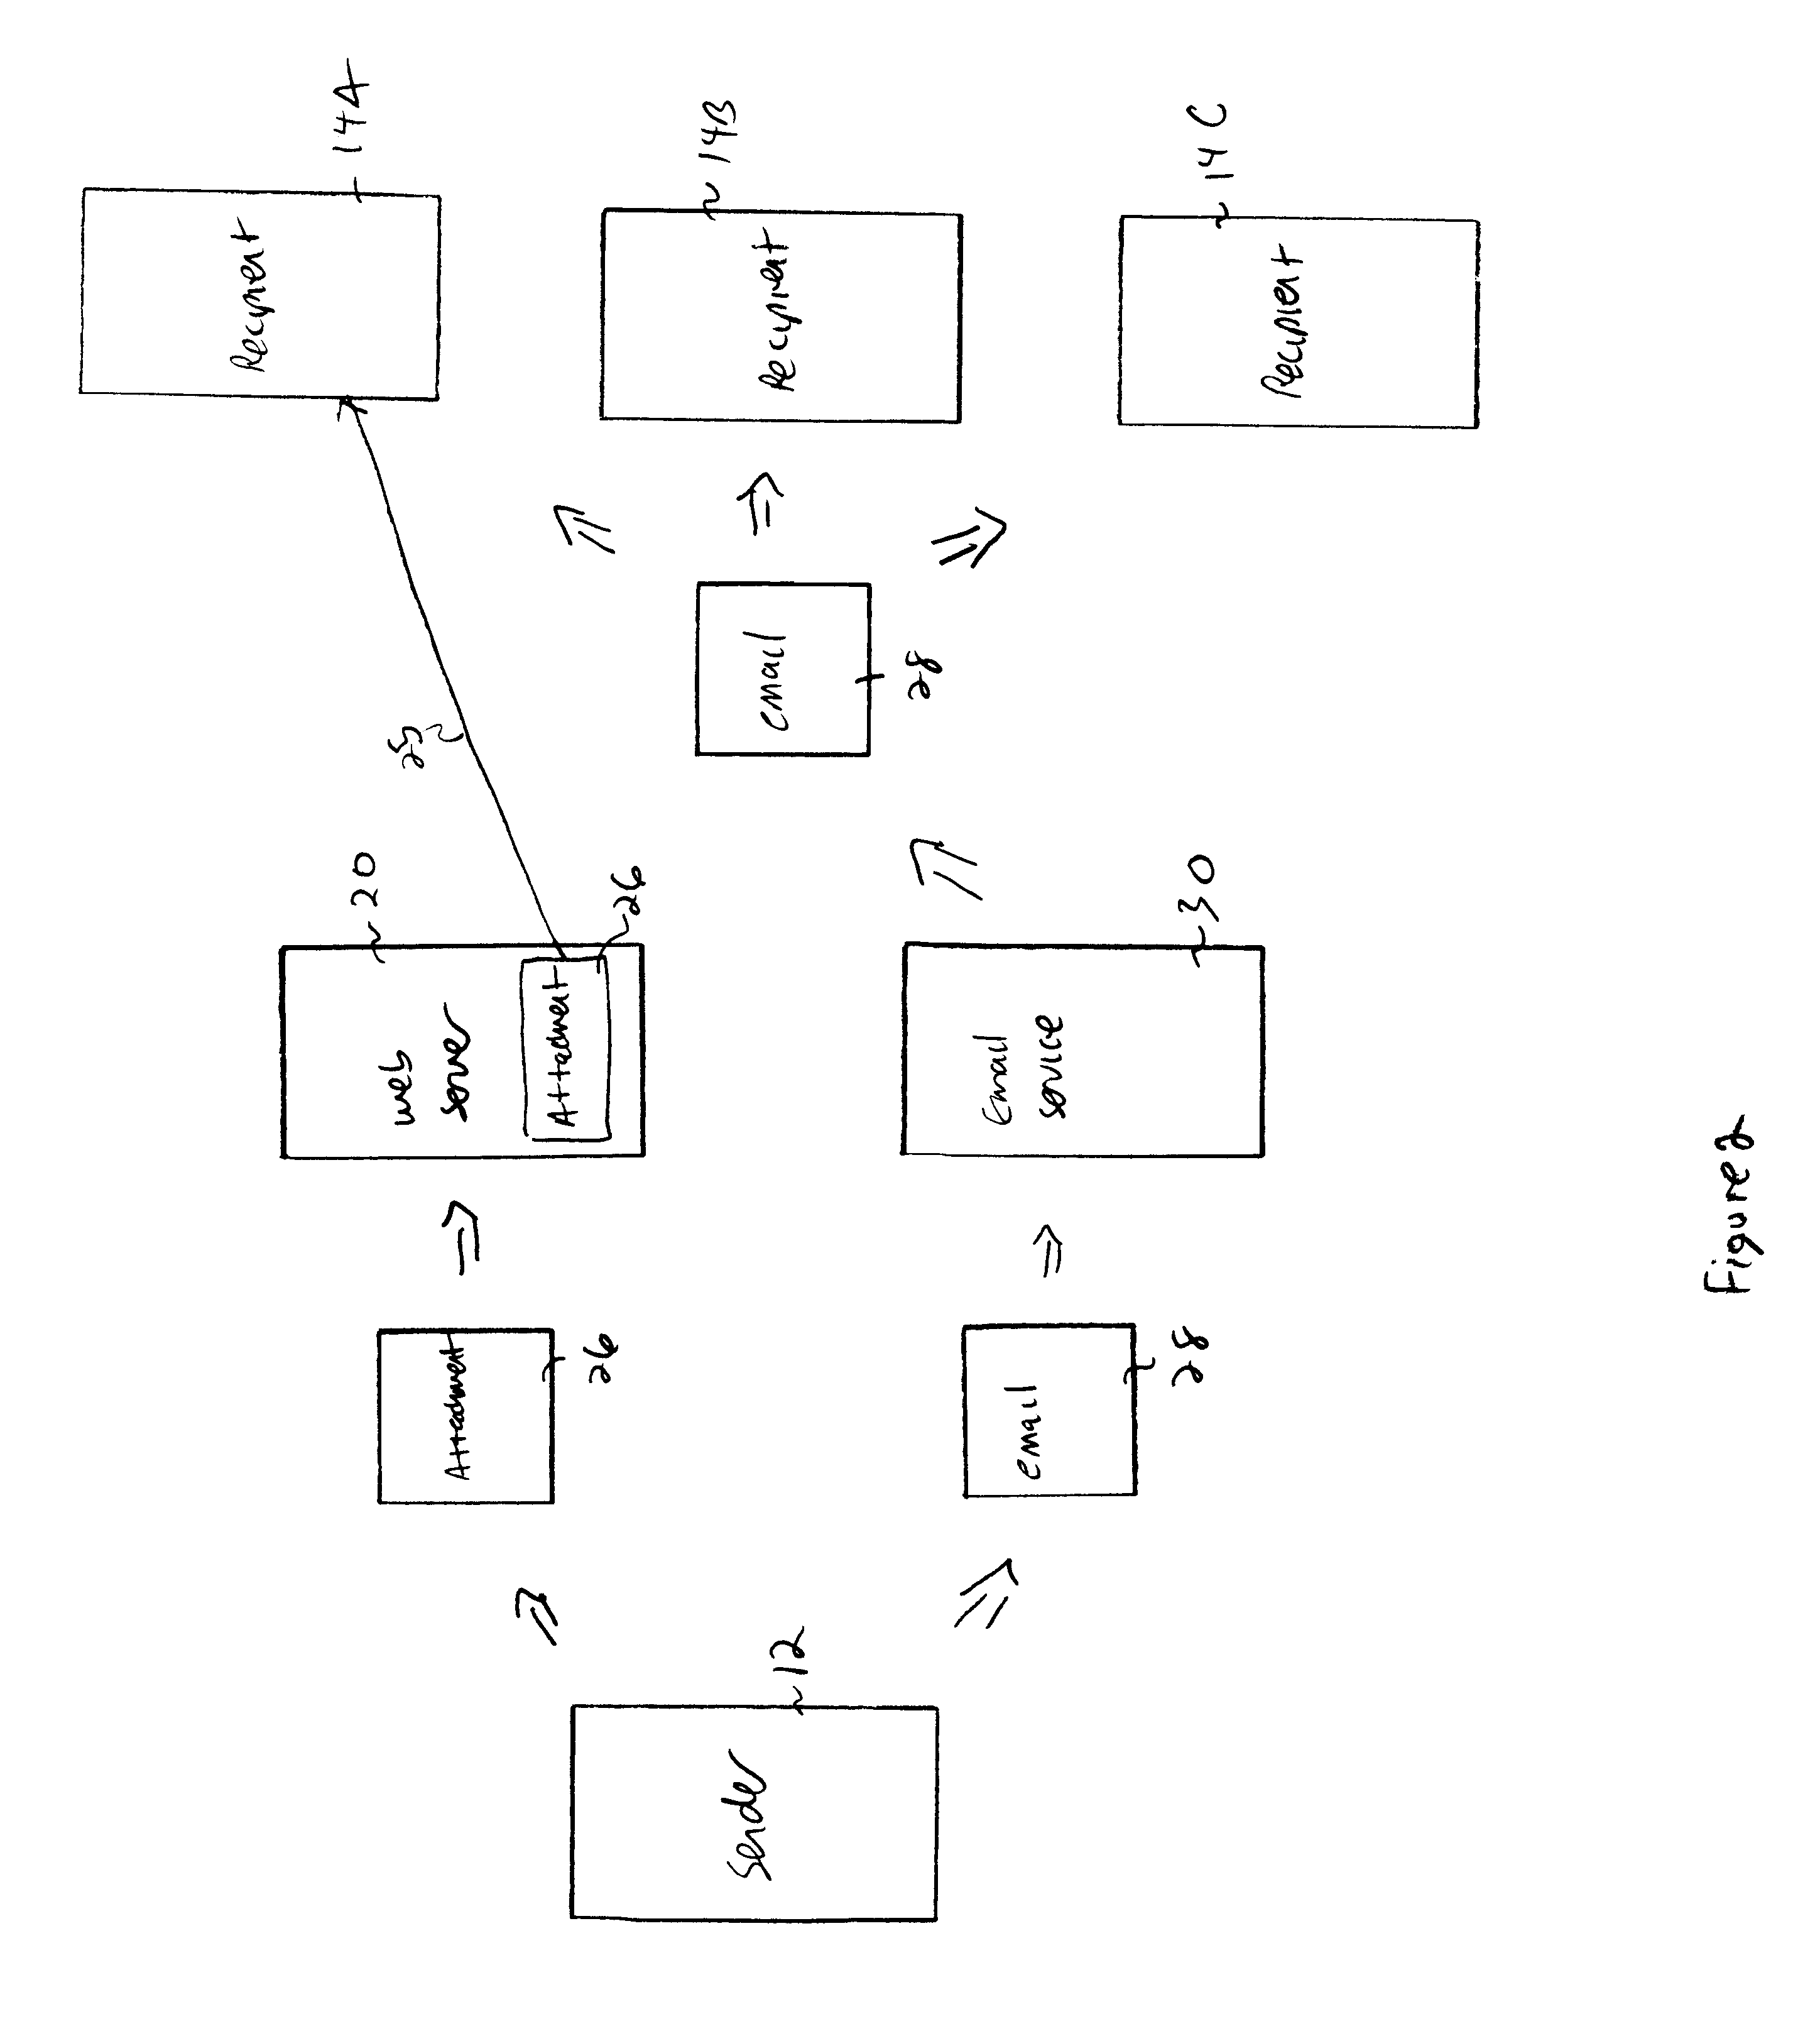 Facility for distributing and providing access to electronic mail message attachments